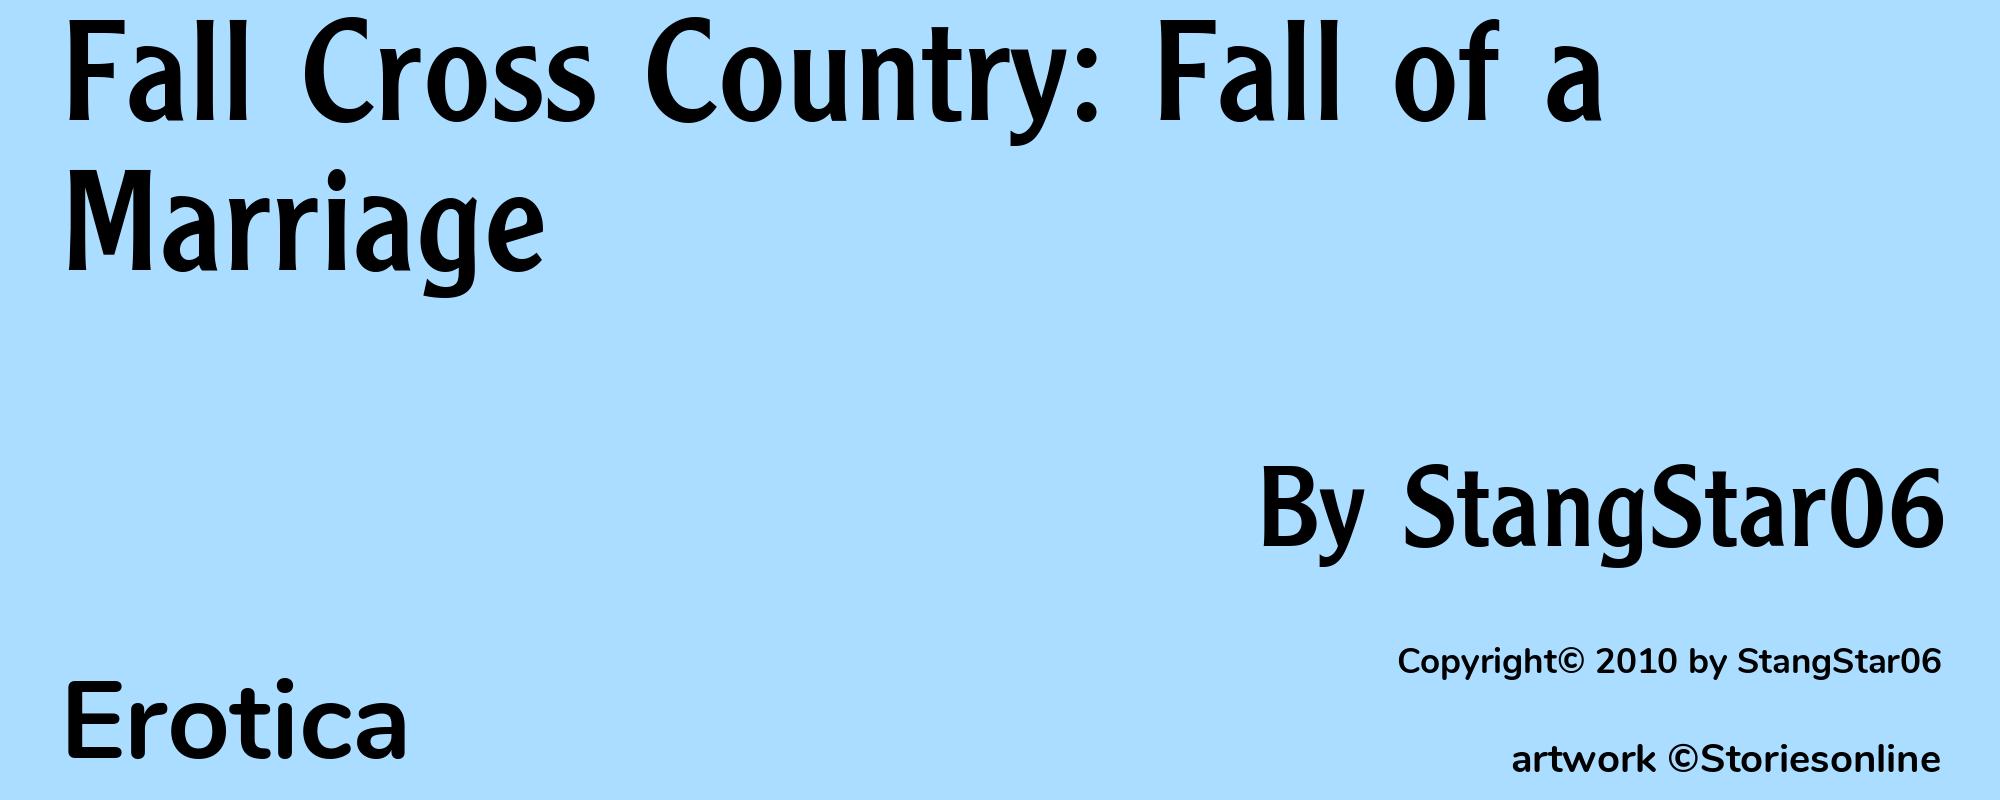 Fall Cross Country: Fall of a Marriage - Cover